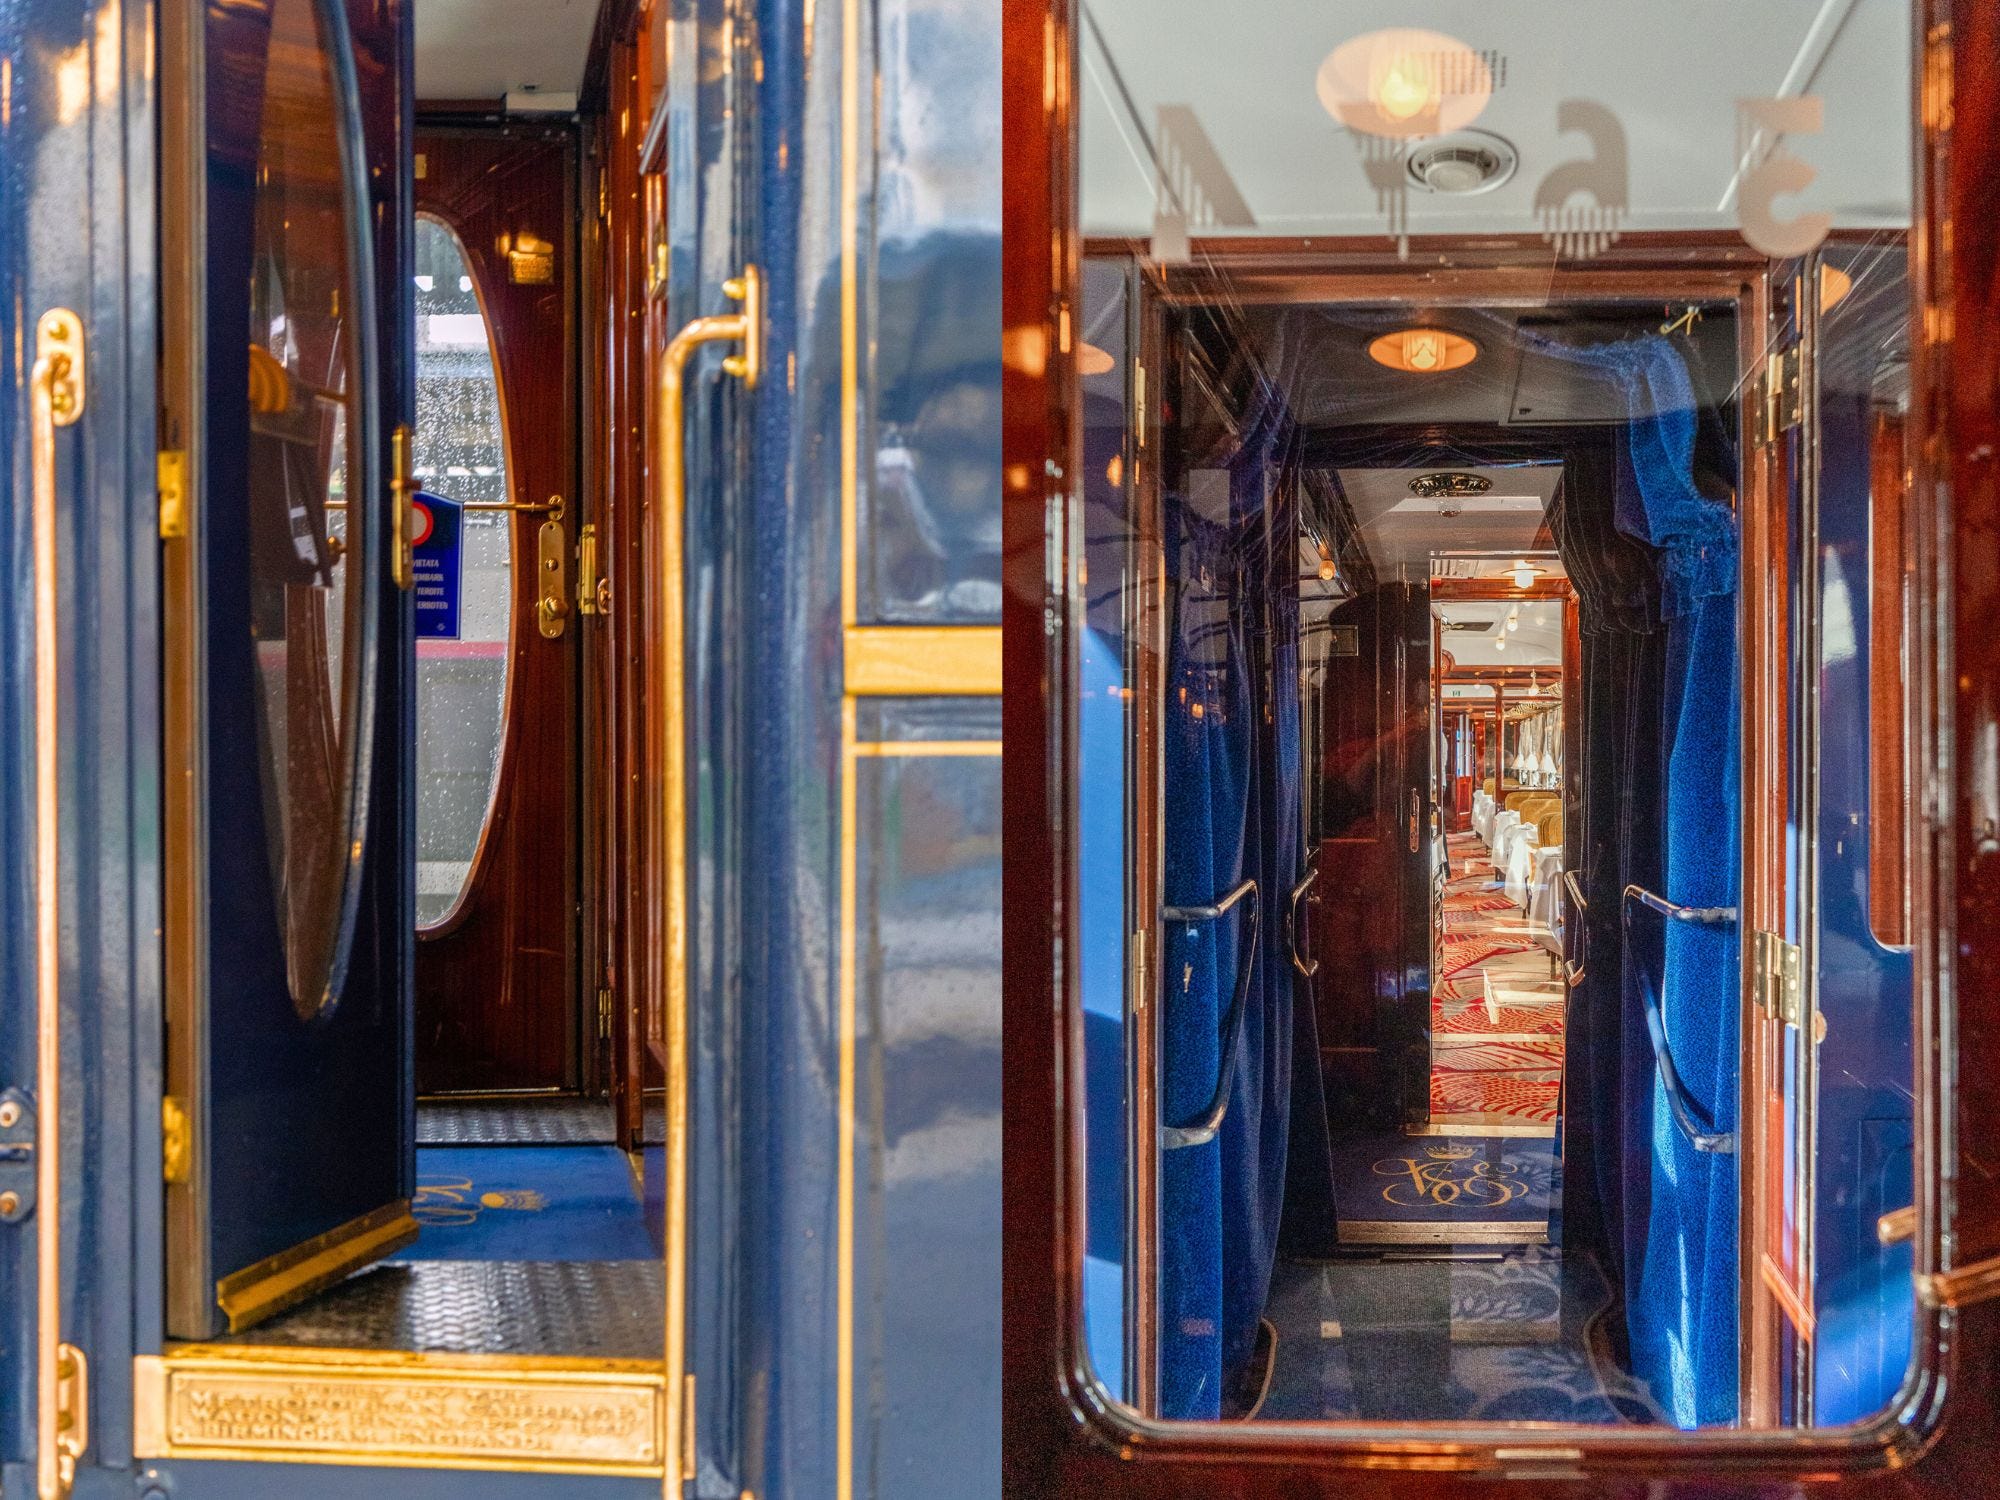 Left: An open door to a nave blu train. Right: : A wooden, windowed door to a room with blue carpets and seats.